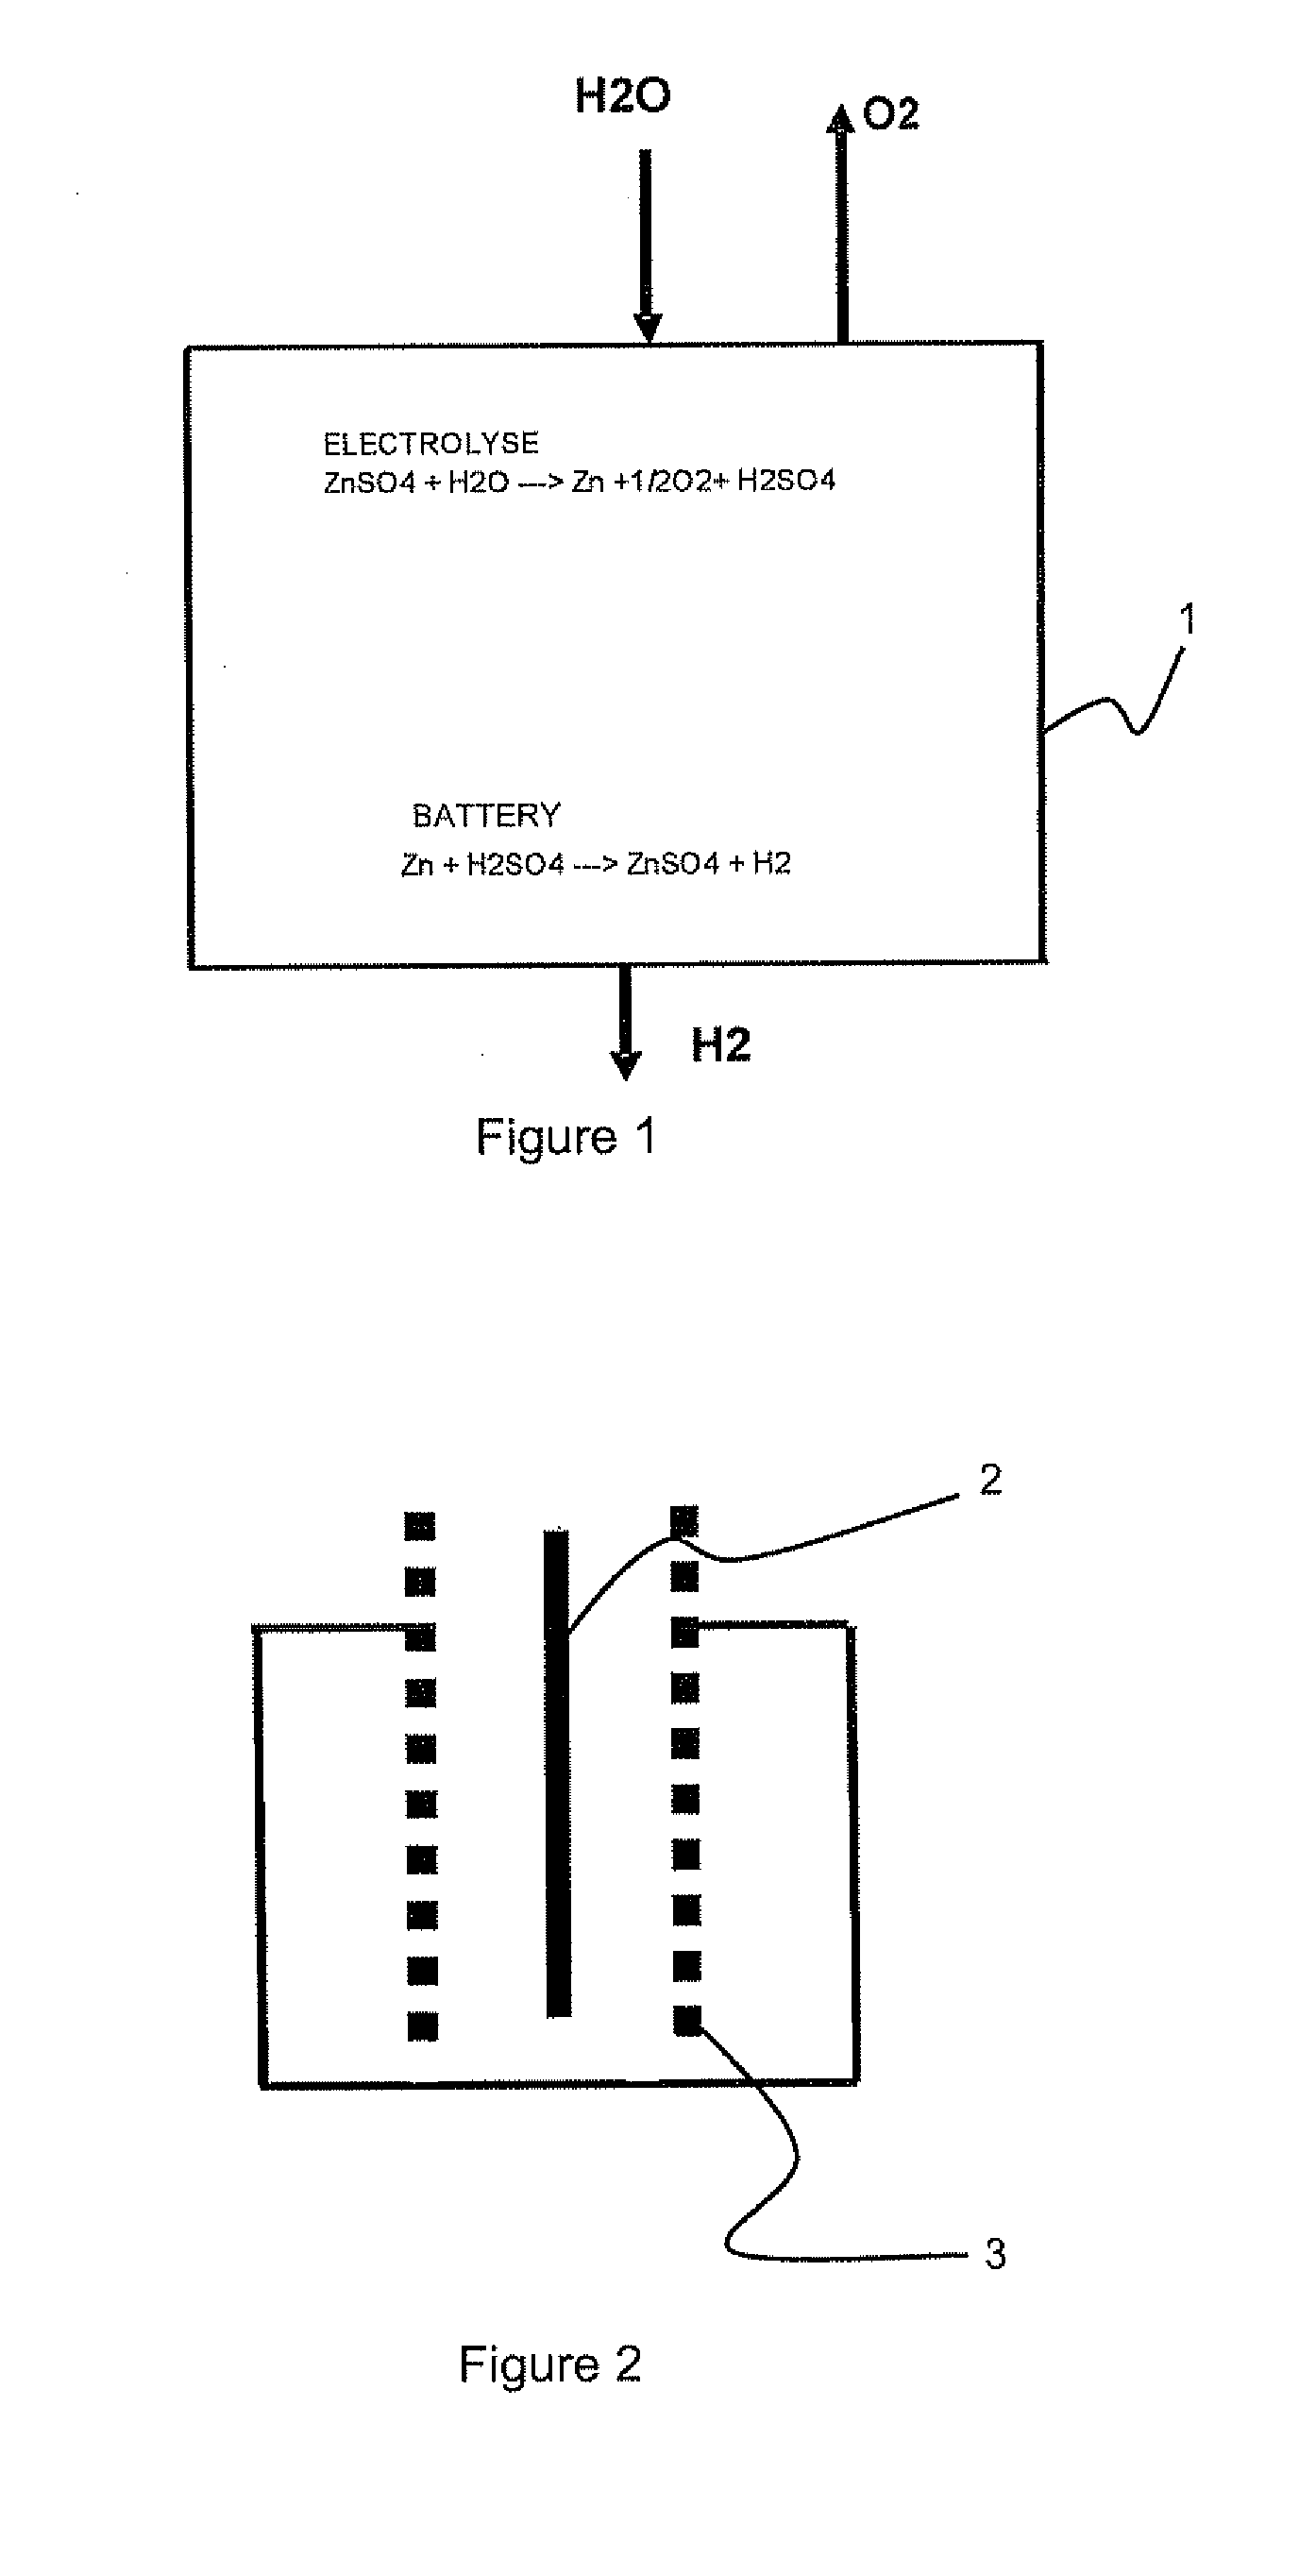 Method for co-generation of electric energy and hydrogen